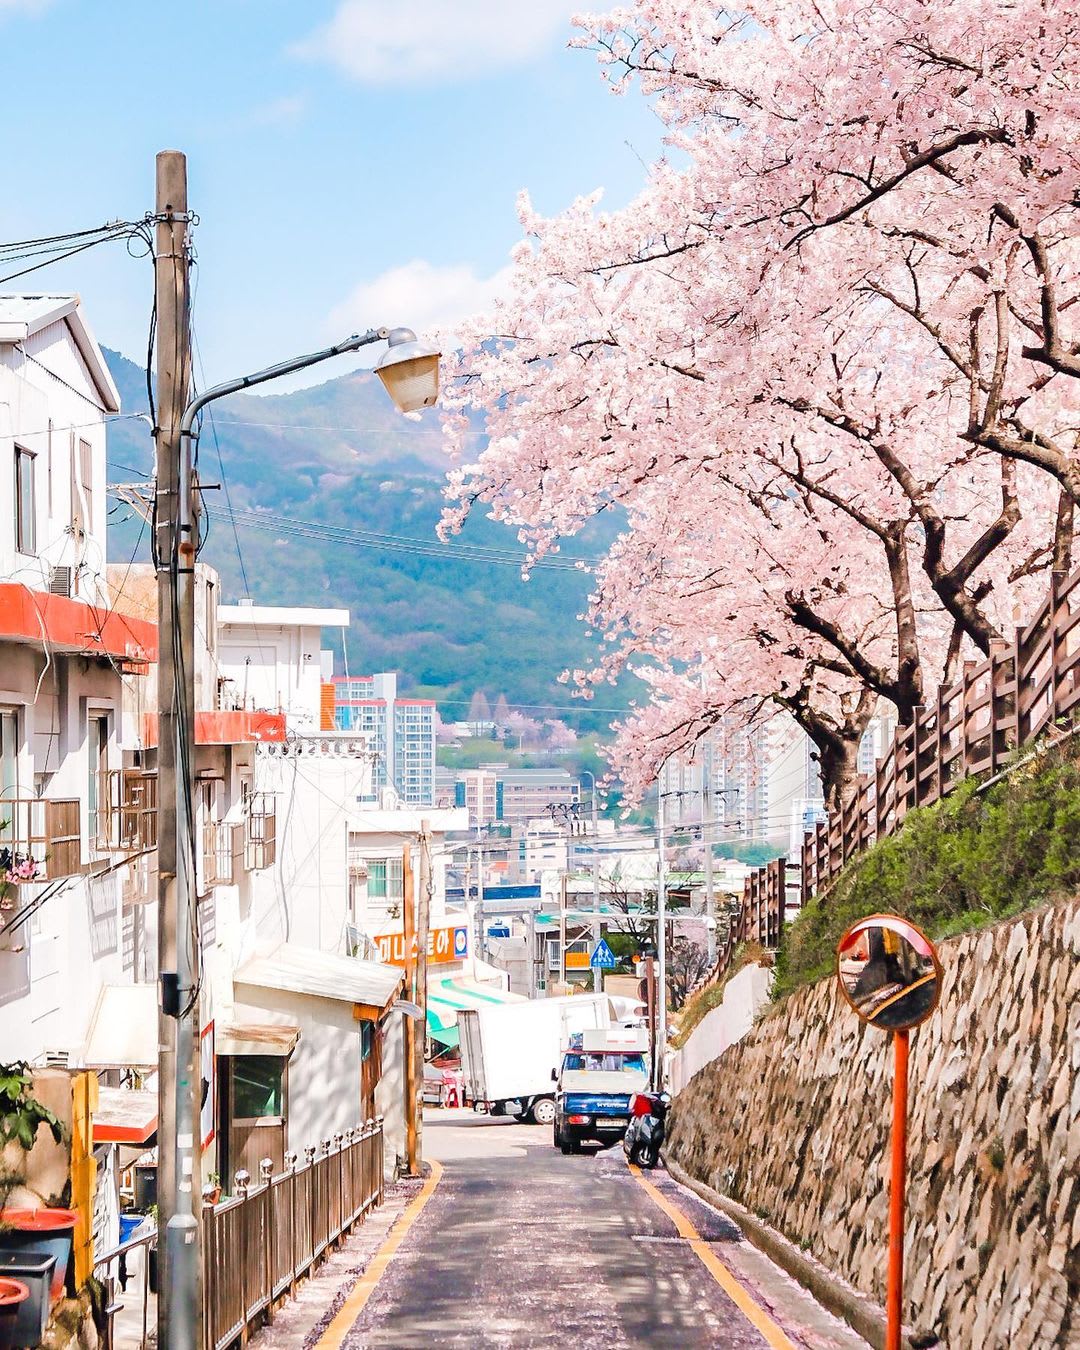 Cherry blossoms on a steep street overlooking the cityscape of Busan, South Korea.